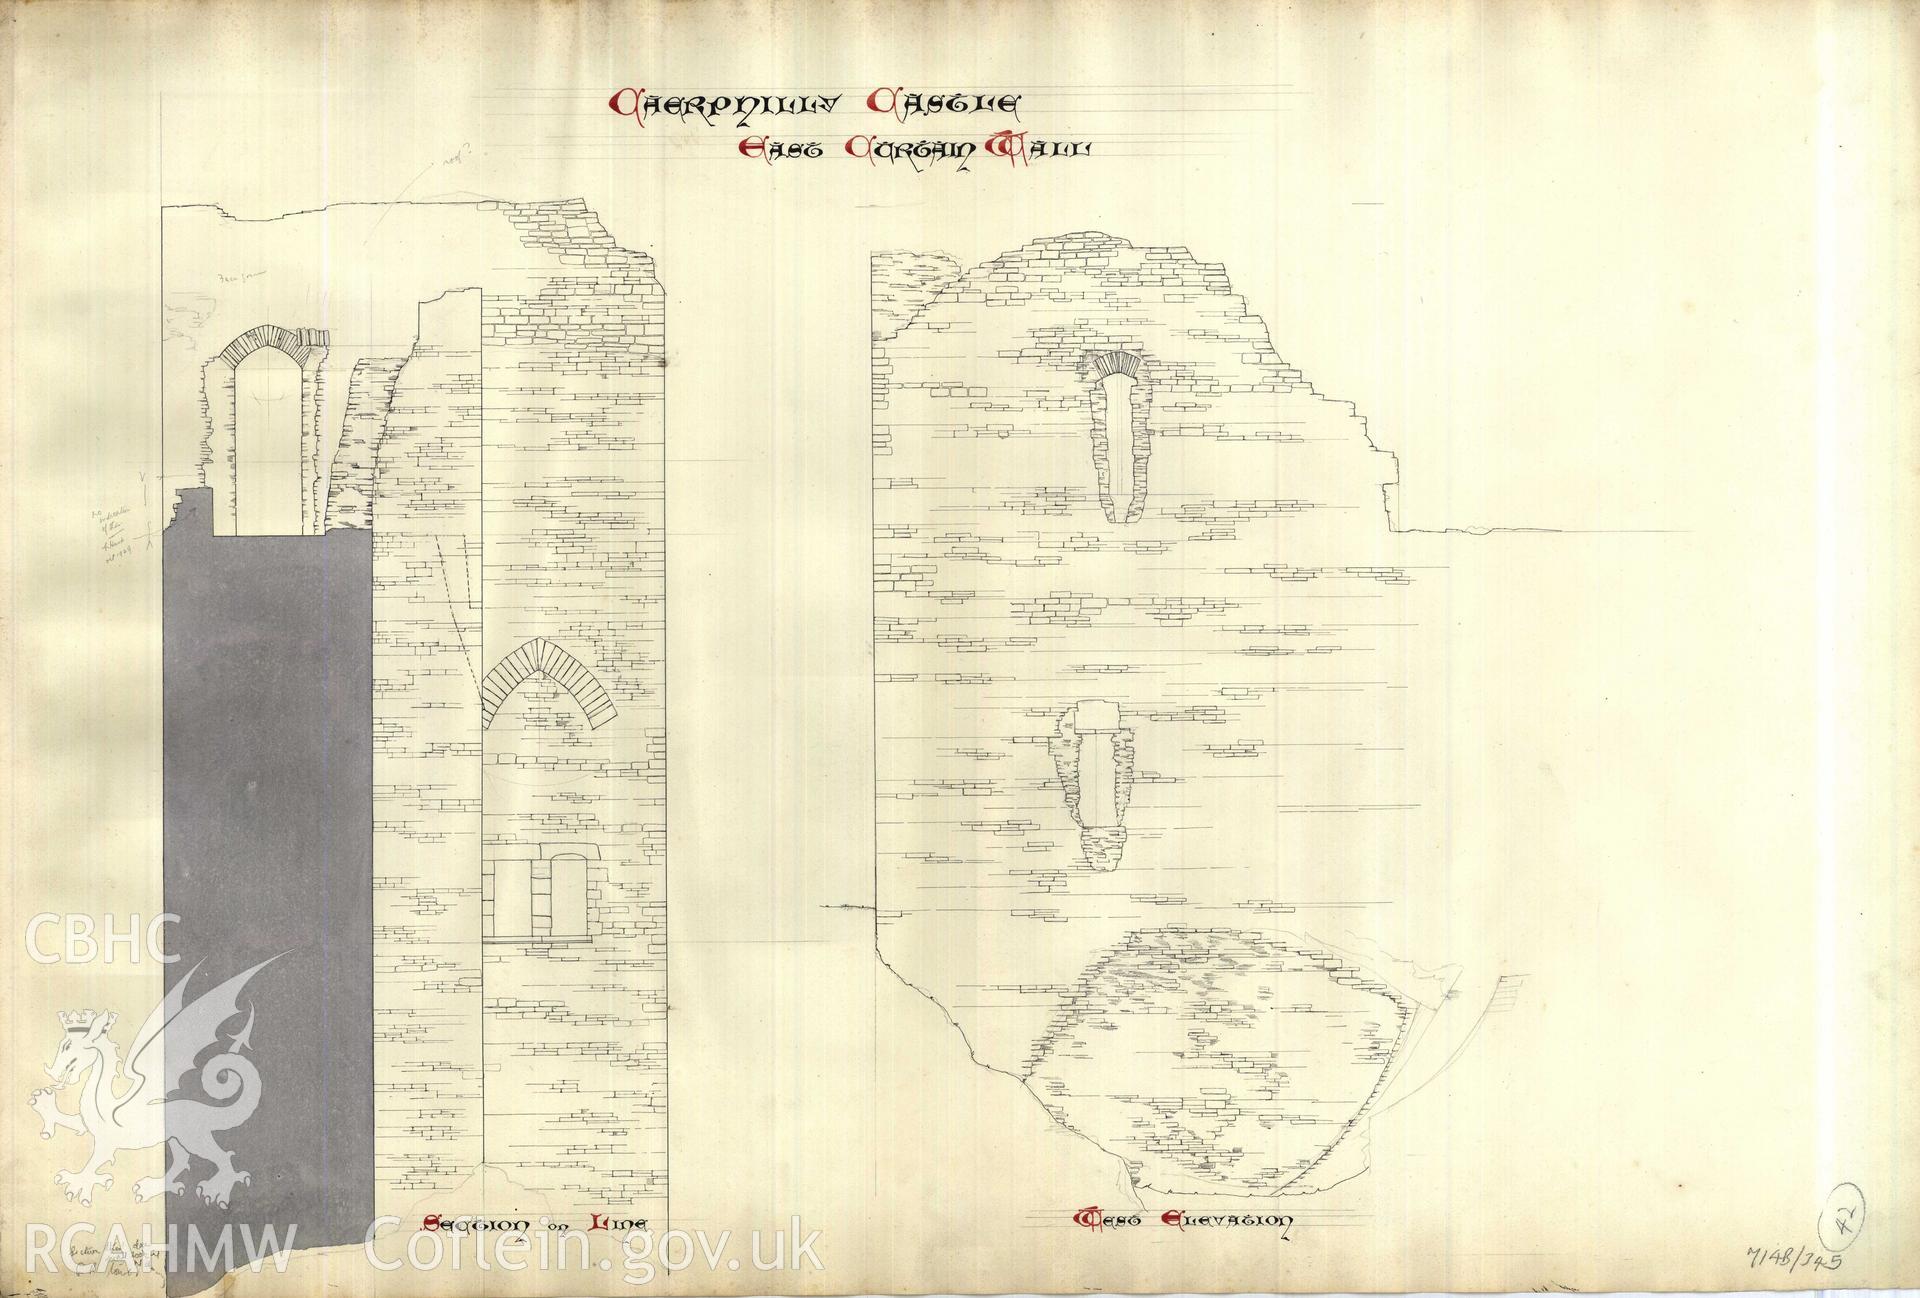 Cadw guardianship monument drawing of Caerphilly Castle. Dam front S, Latrine T, S+W elevs. Cadw Ref. No:714B/345. Scale 1:24.